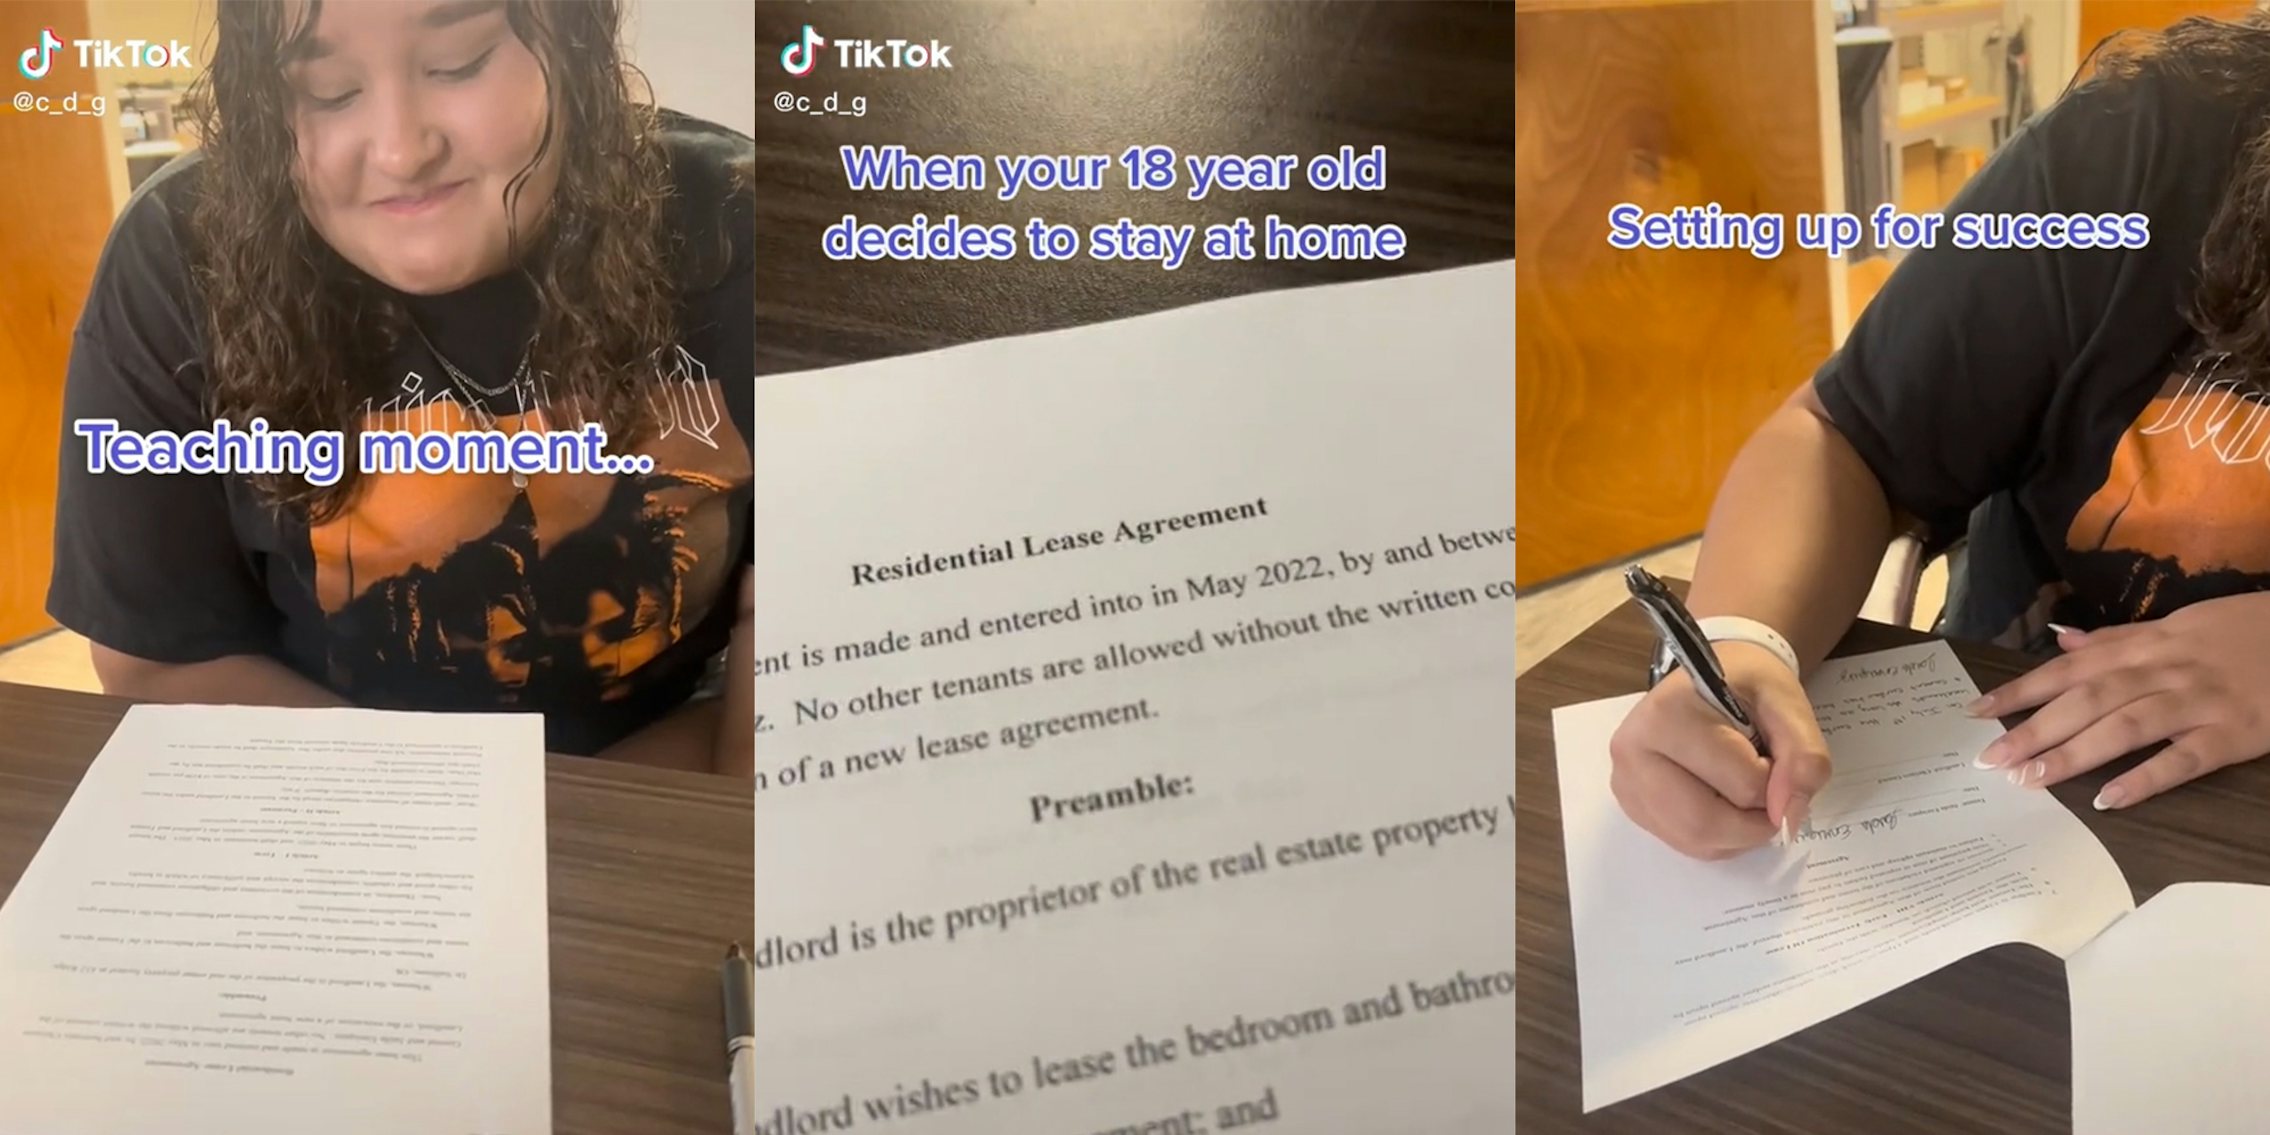 young woman looking at contract with caption 'Teaching moment...' (l) Residential Lease Agreement with caption 'When your 18 year old decides to stay at home' (c) young woman signing contract with caption 'Setting up for success' (r)